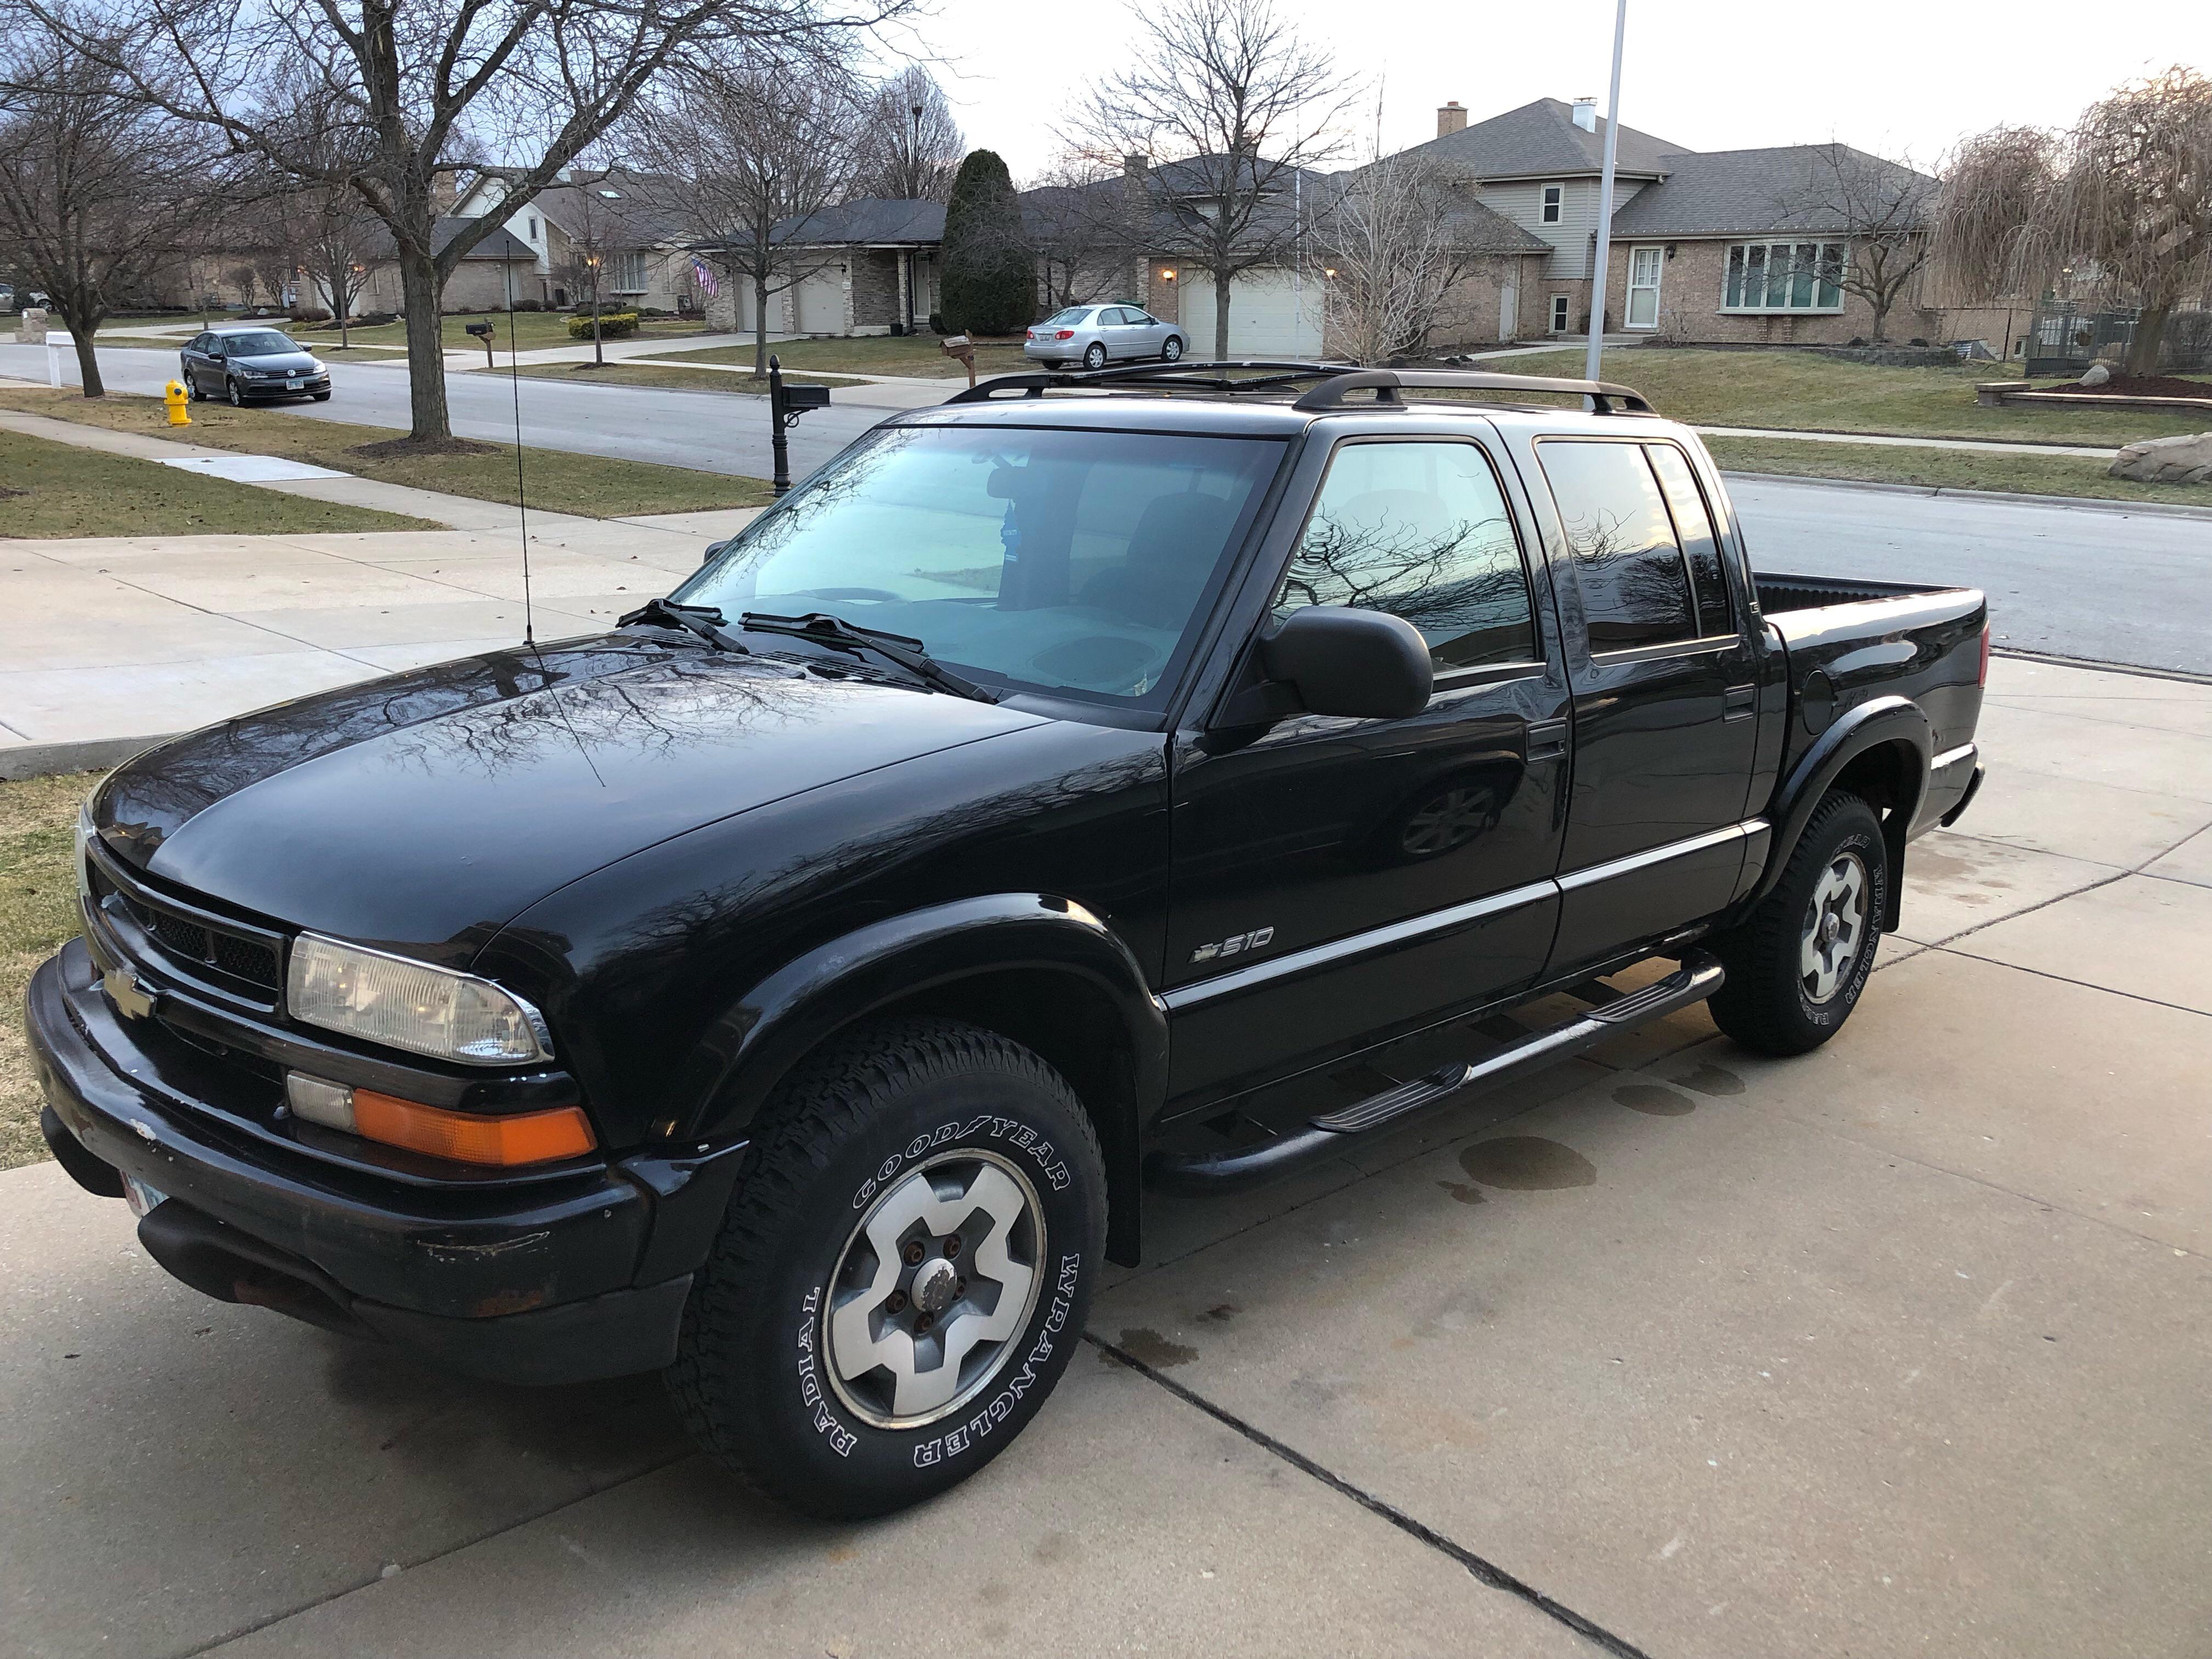 My first truck. 2002 chevy s10 crew cab bought from my neighbor for $500.  350 in parts and a drained gas tank later and it's running great. Got some  rust and some